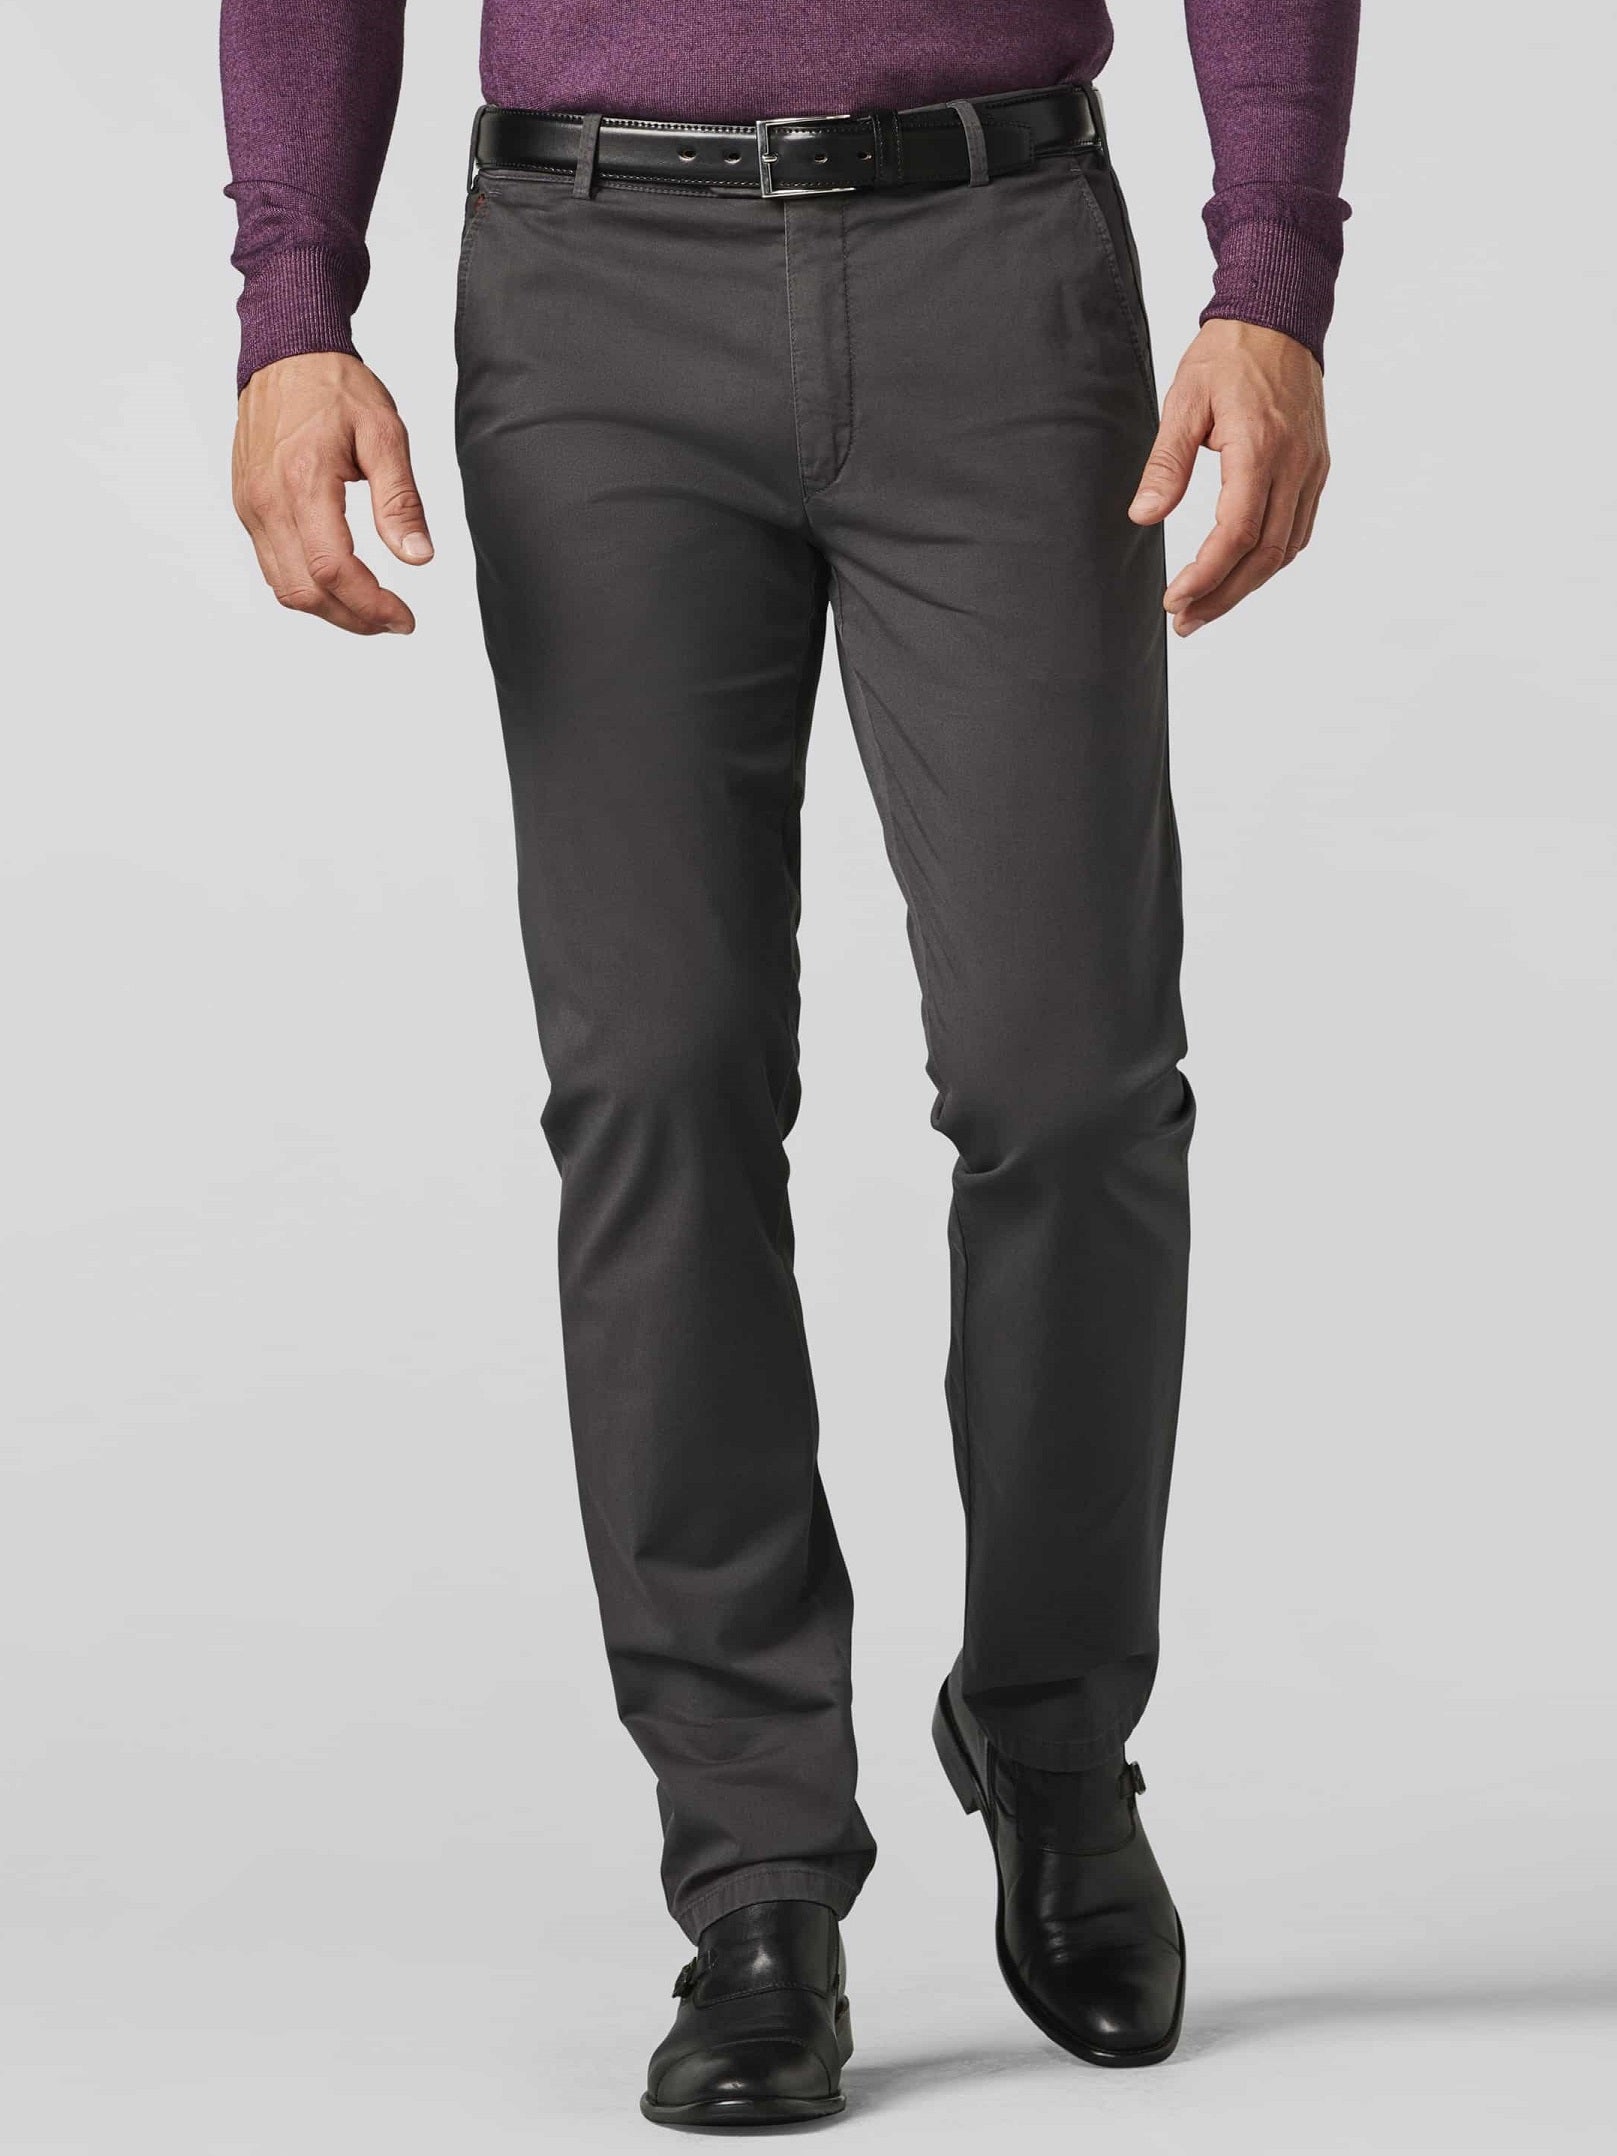 30% OFF MEYER Trousers - Roma 316 Luxury Cotton Chinos - Charcoal - Size 34 REG